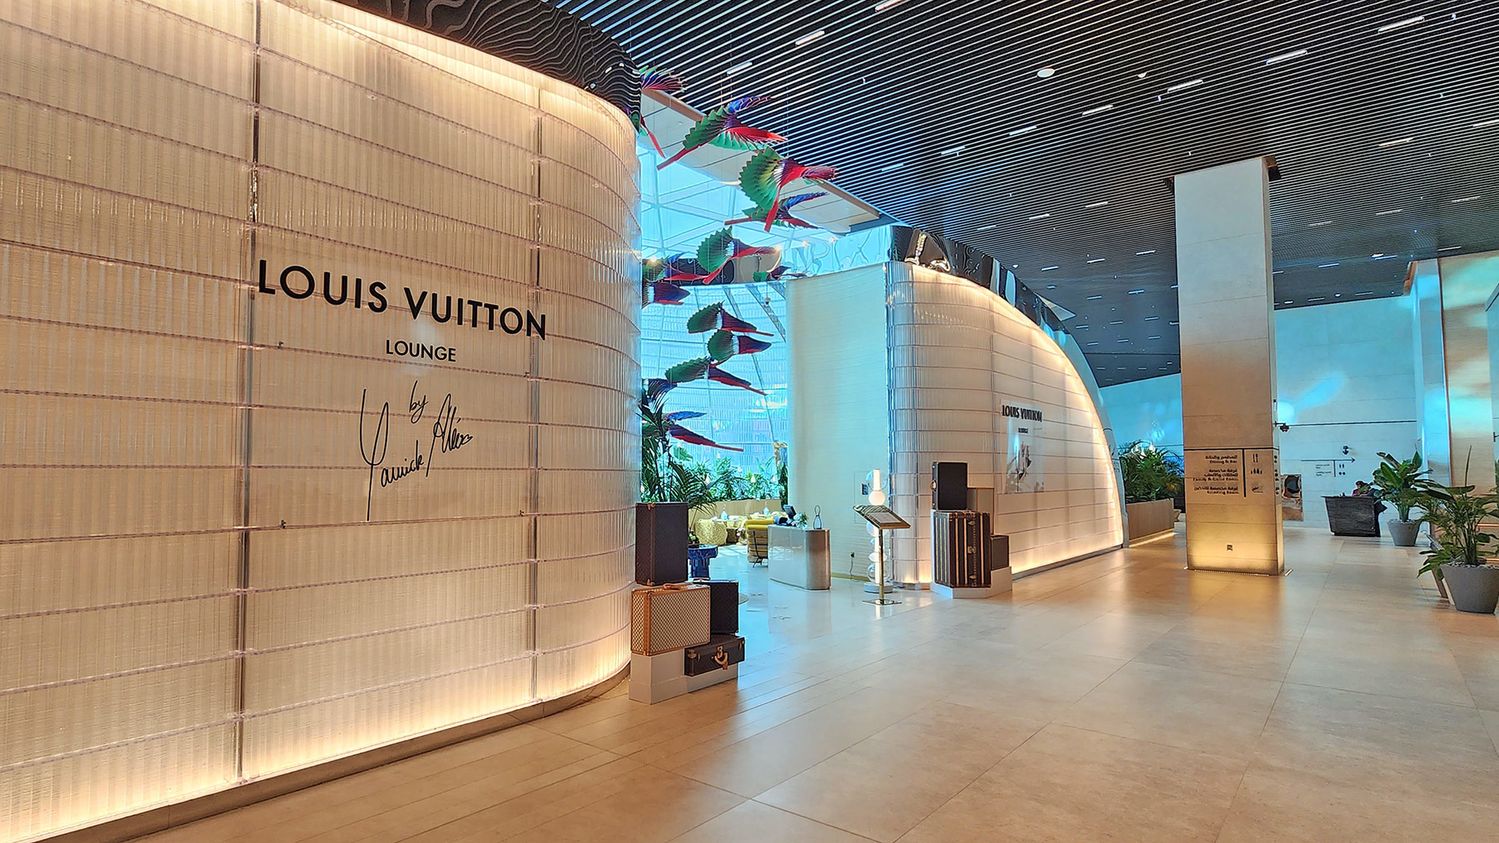 Louis Vuitton Opens its First Lounge at Qatar's Hamad